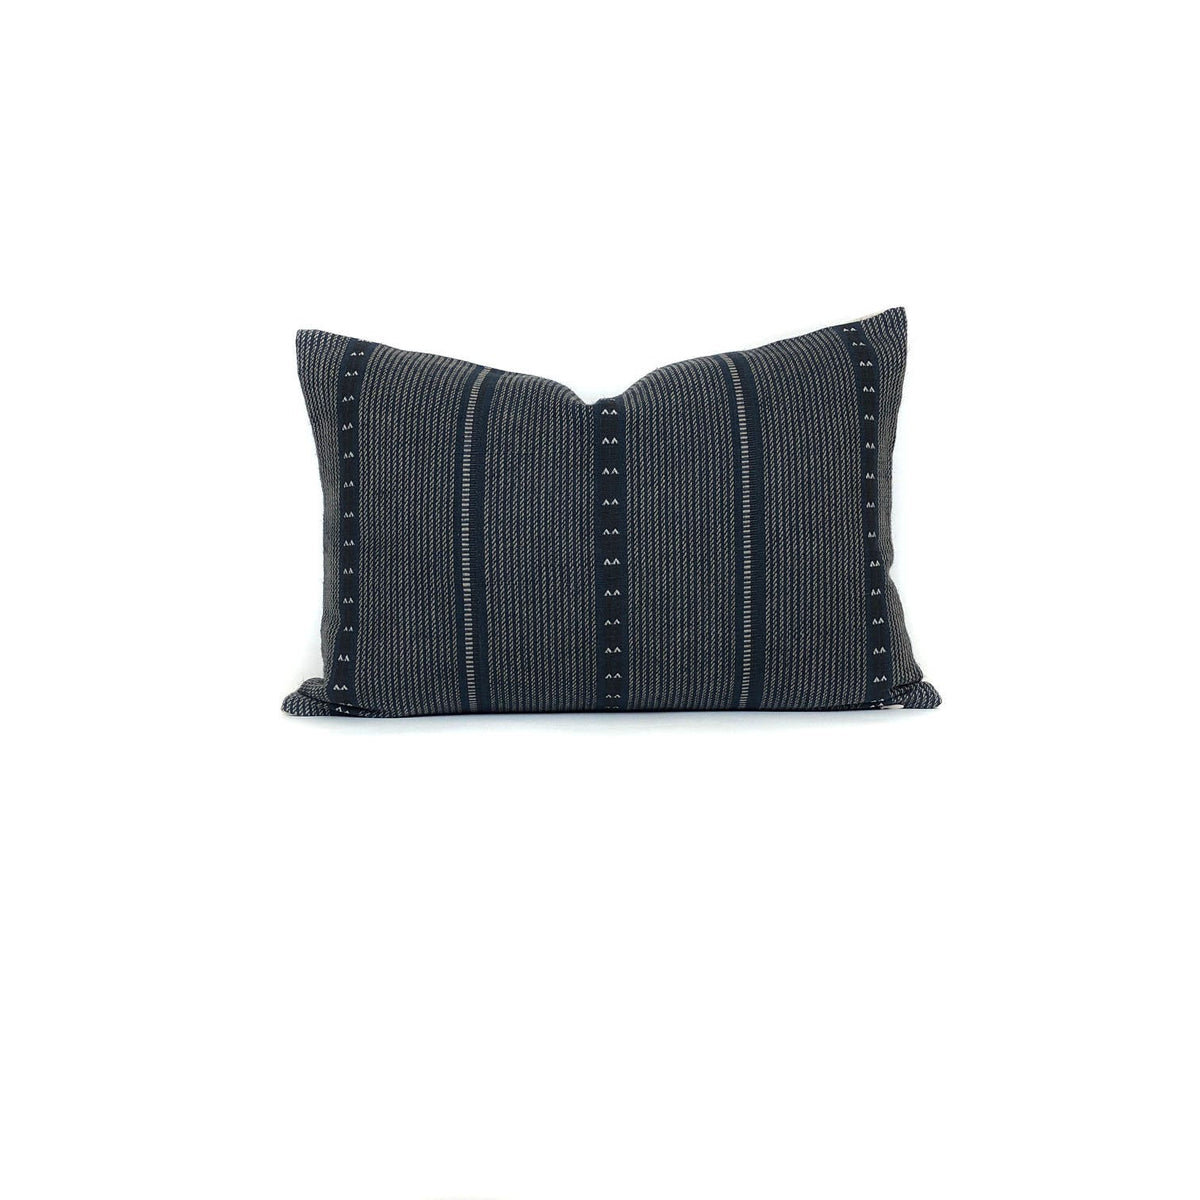 Cardiff Pillow Set | 5 Pillow Covers